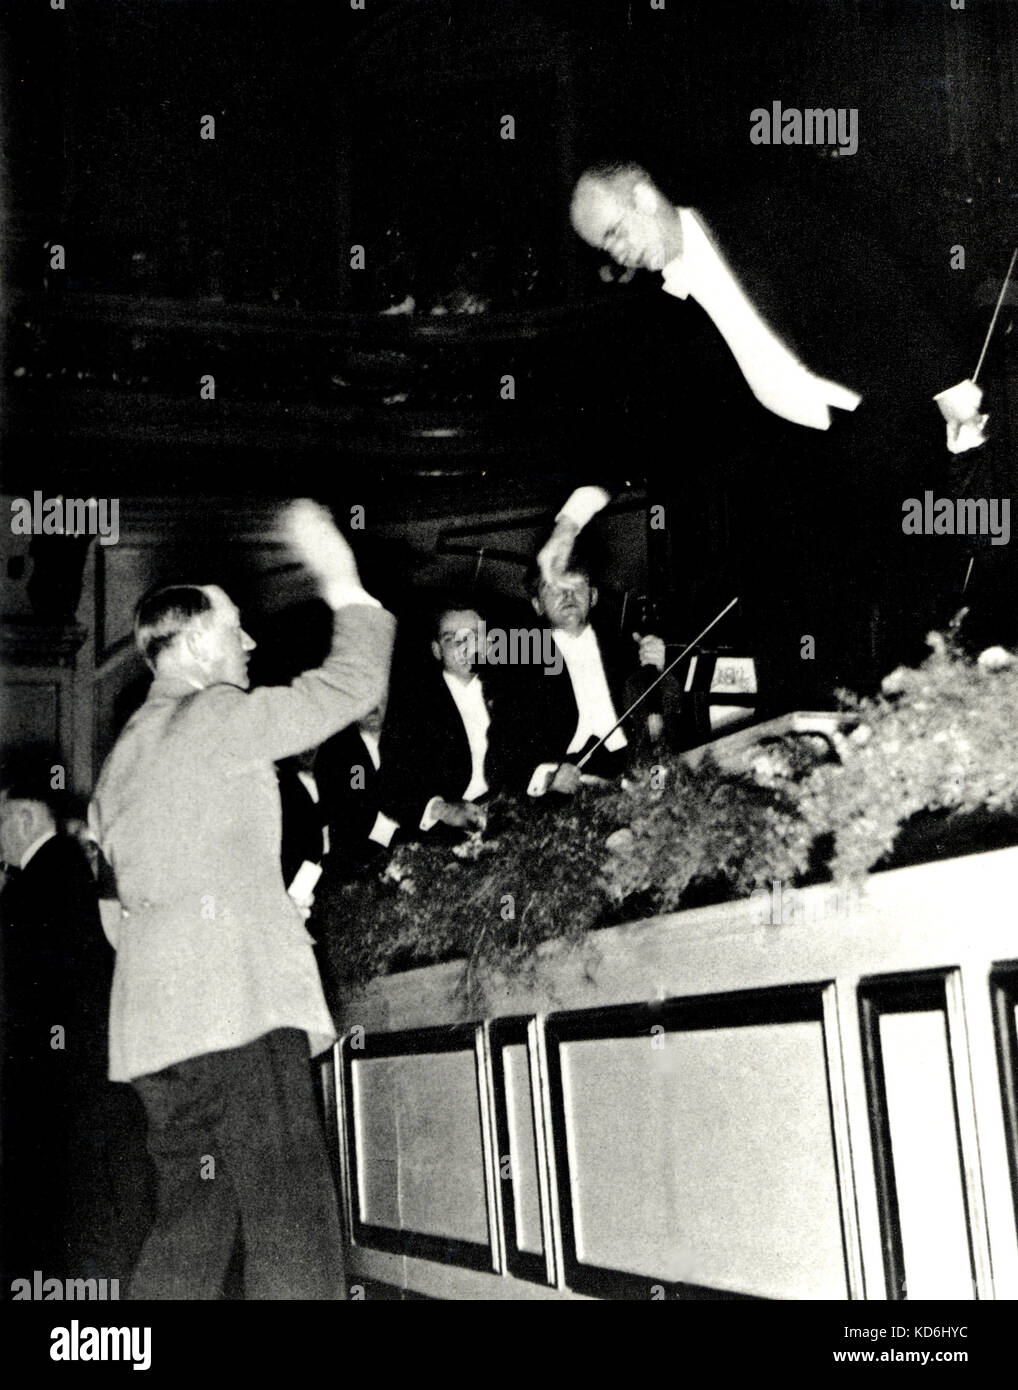 Wilhelm Furtwangler reaching out to shake hands with Hitler, instead of responding with the Heil Hitler gesture, at the end of a concert, 1939. Stock Photo